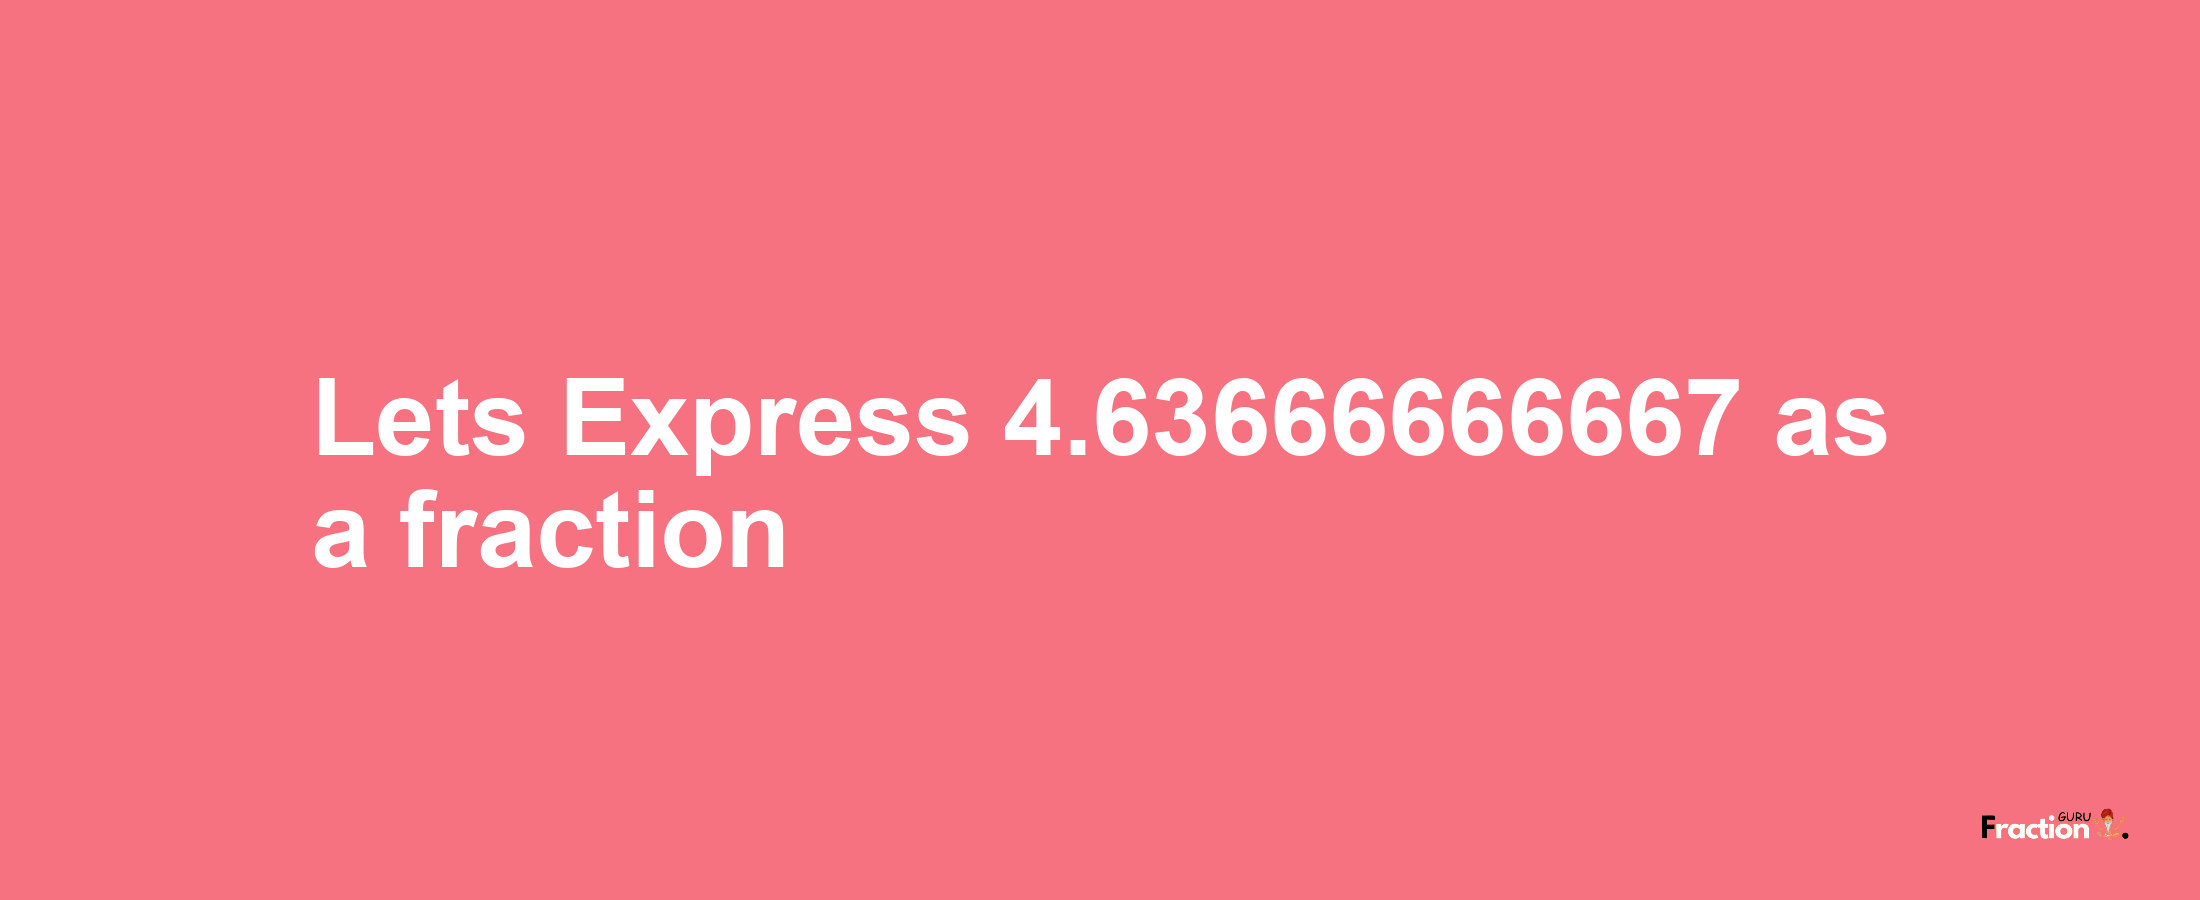 Lets Express 4.63666666667 as afraction